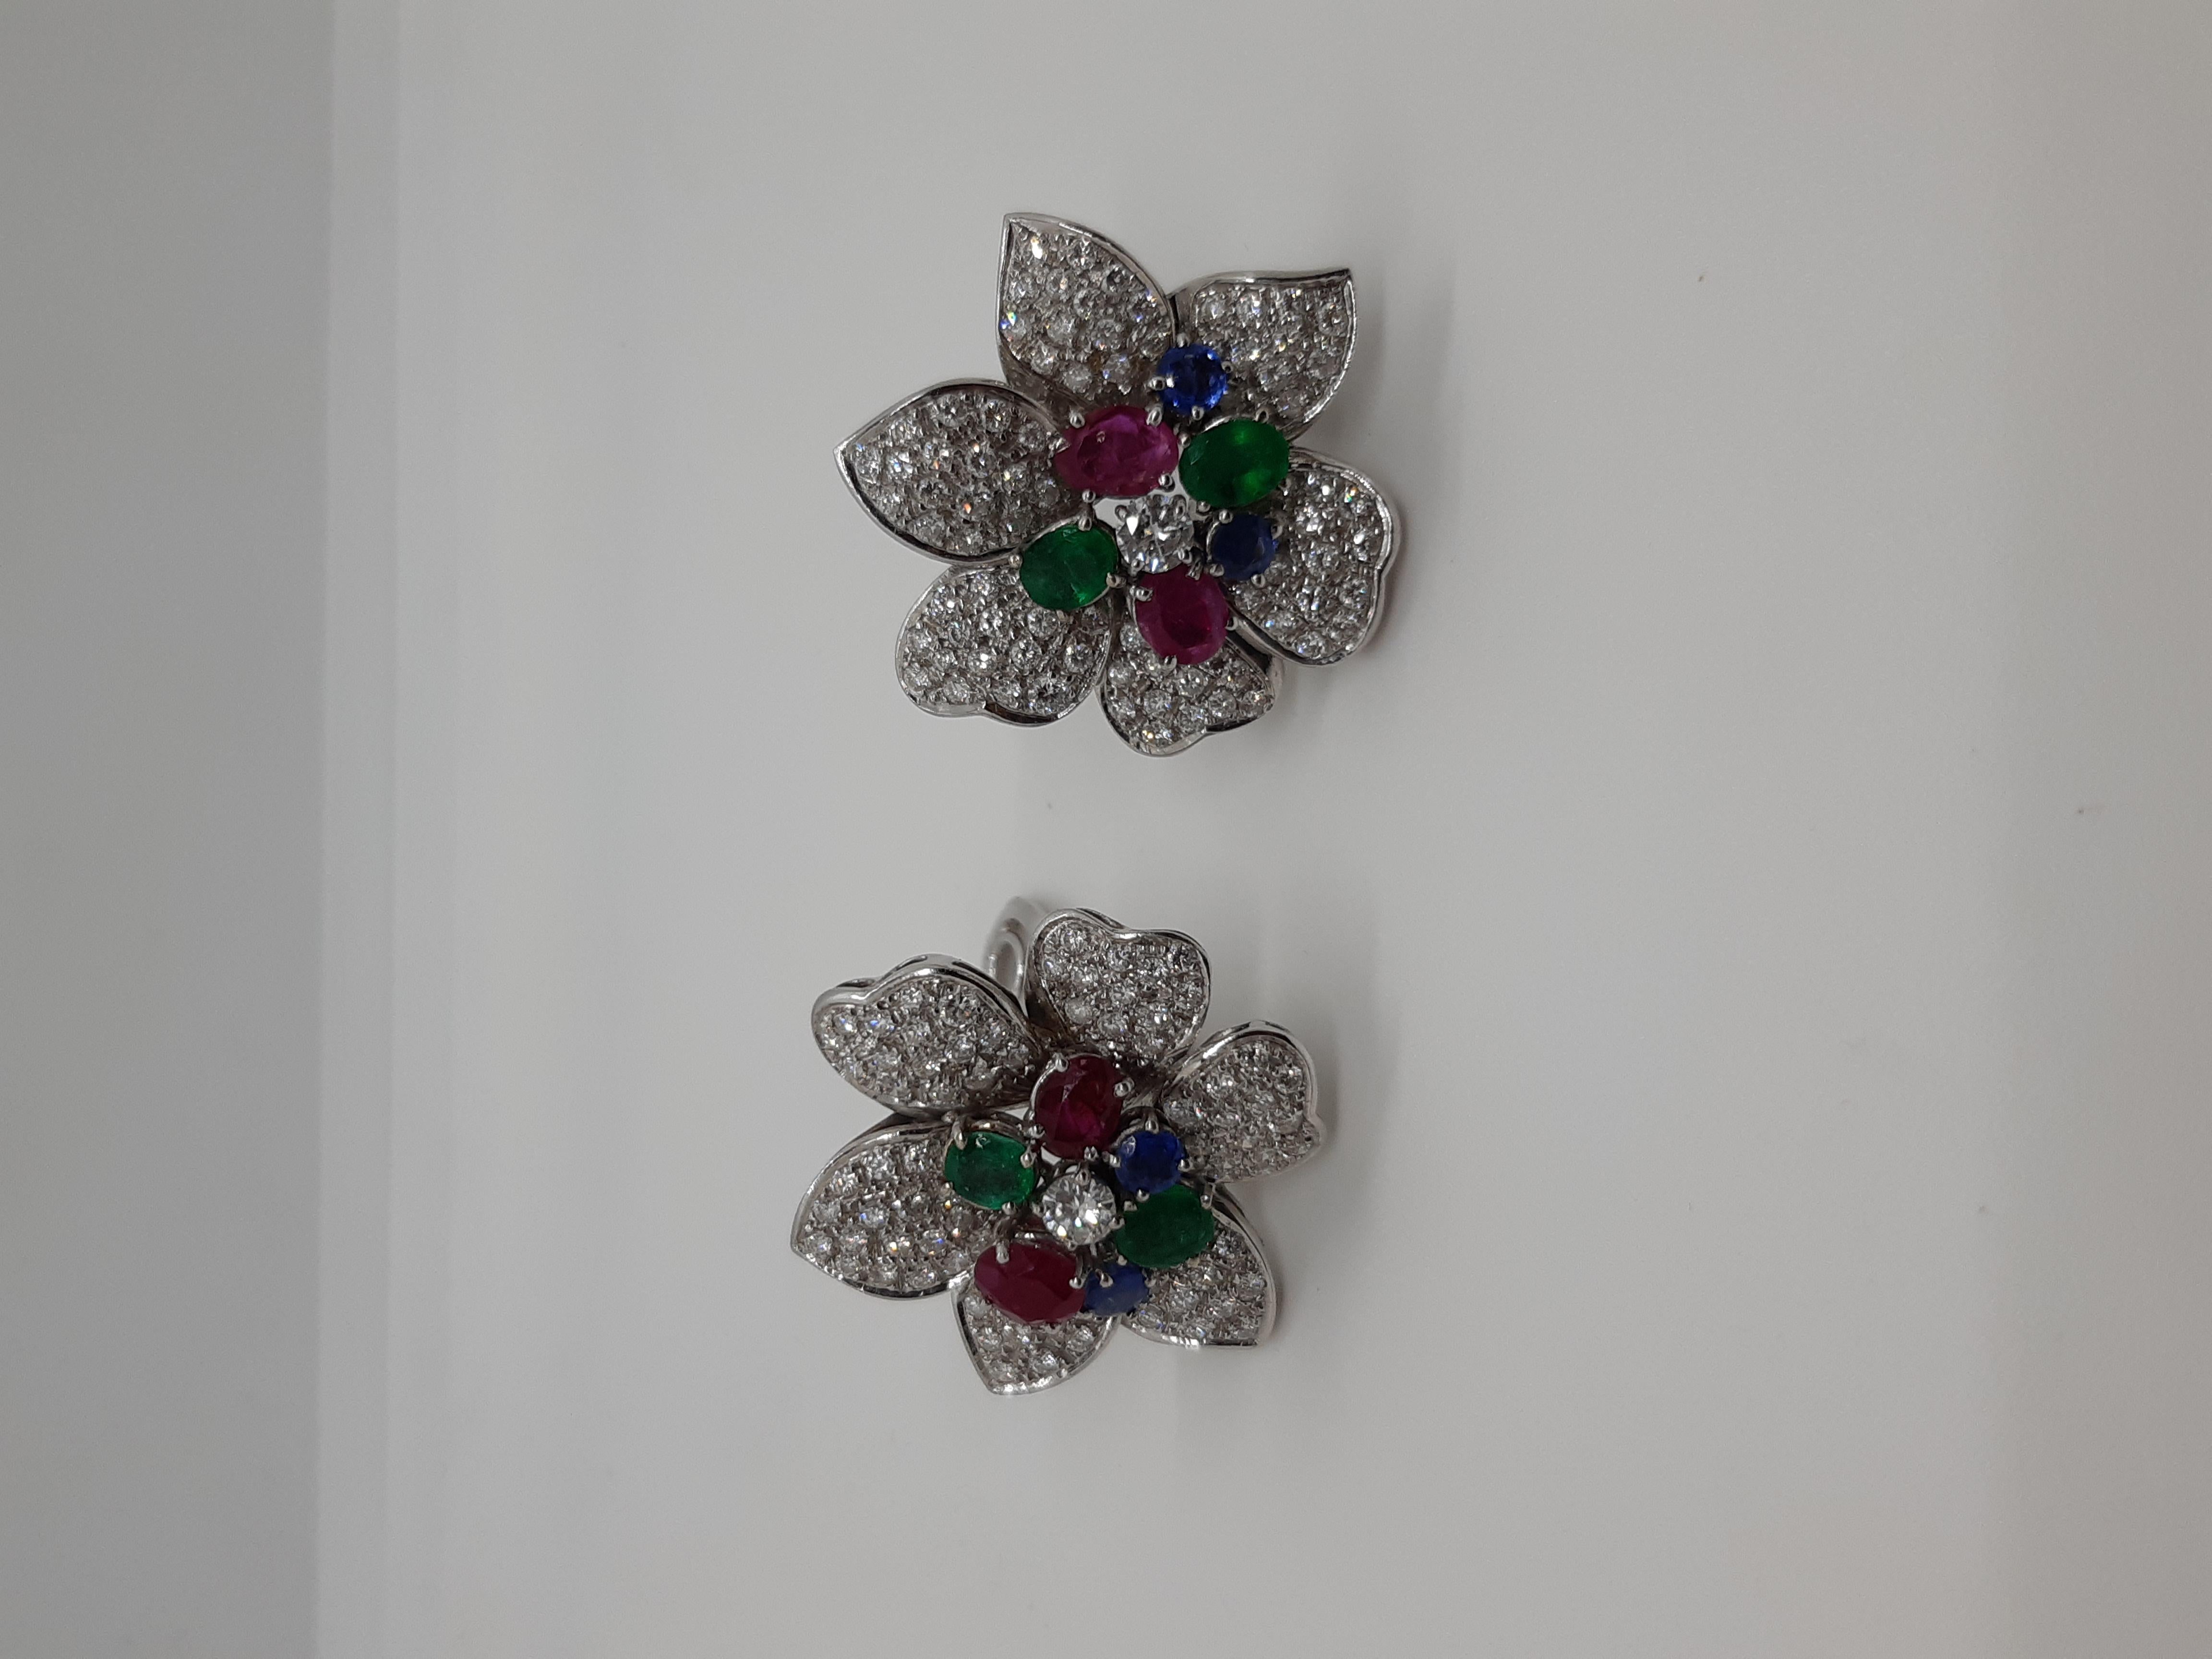 1960s flower earrings 18 kt white gold with round brilliant diamonds ct 2,5  and oval cut sapphires, emeralds and rubies.
weight 26 grams